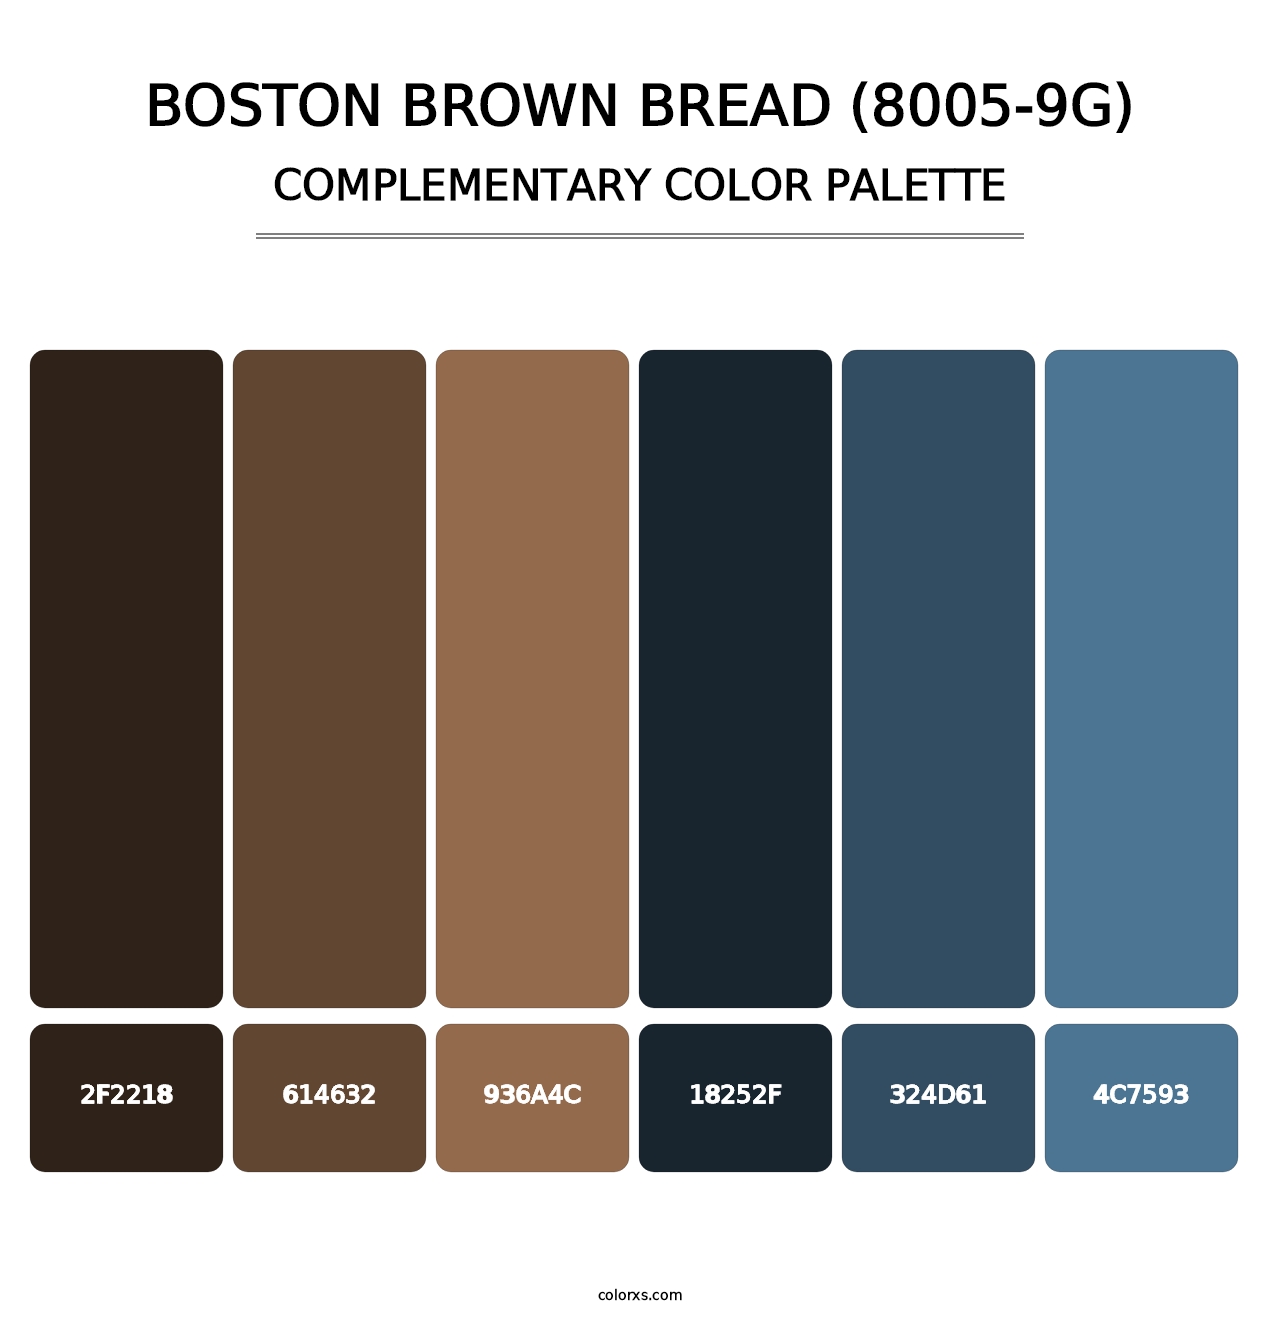 Boston Brown Bread (8005-9G) - Complementary Color Palette